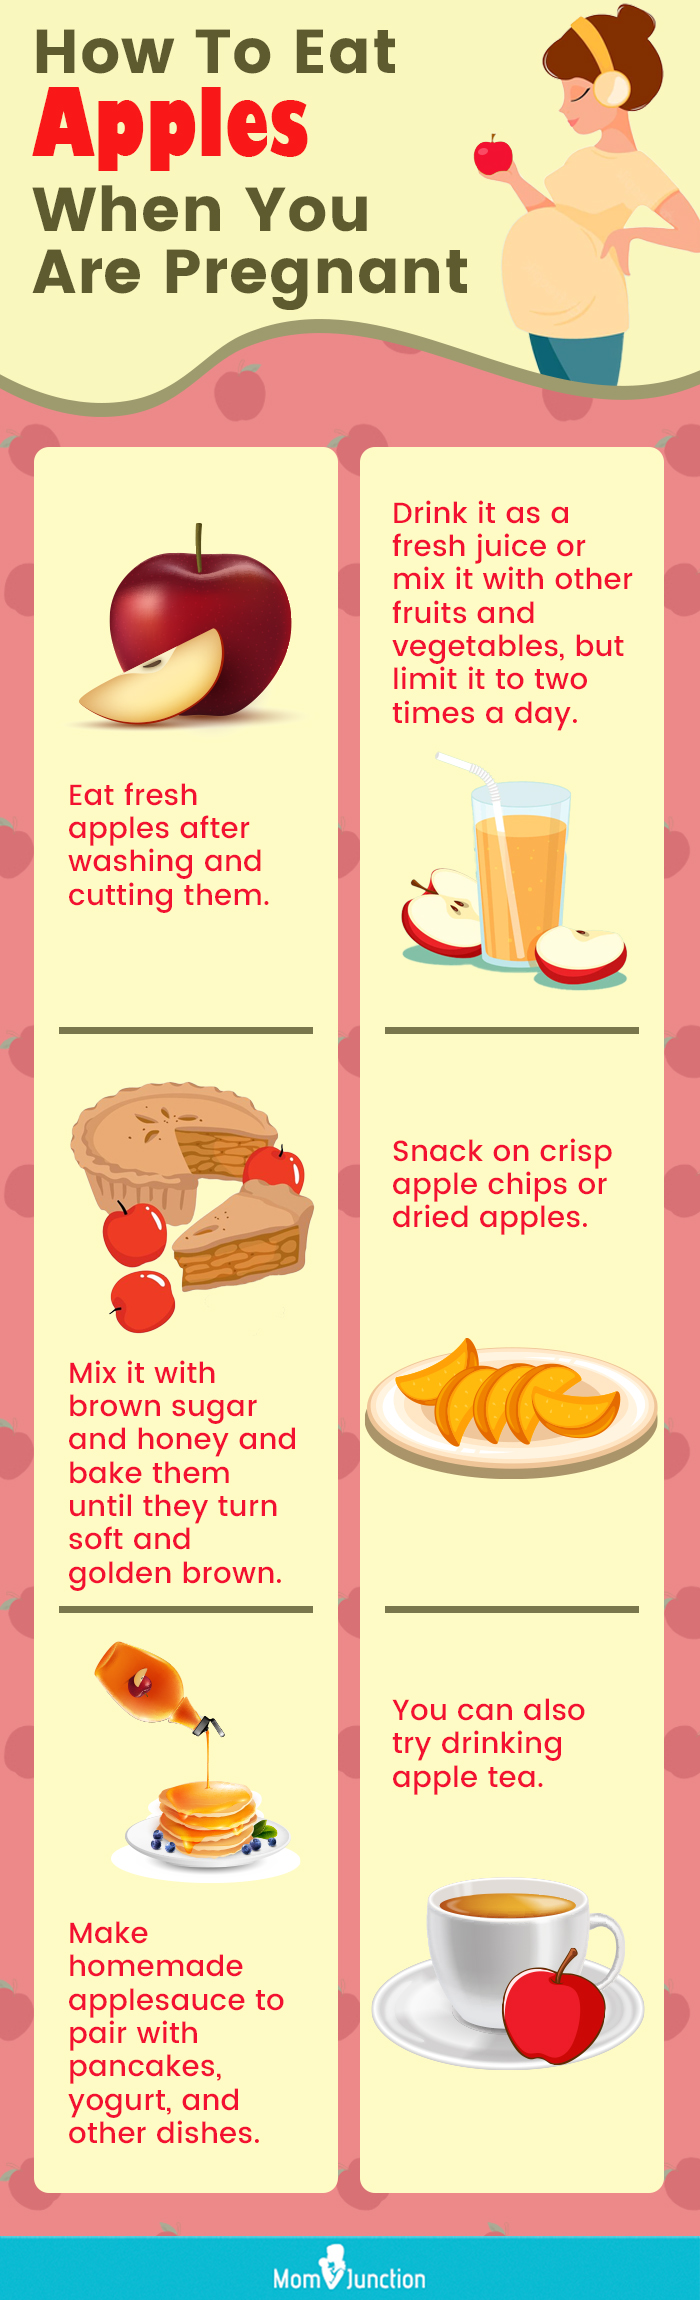 how to eat apples when you are pregnant (infographic)